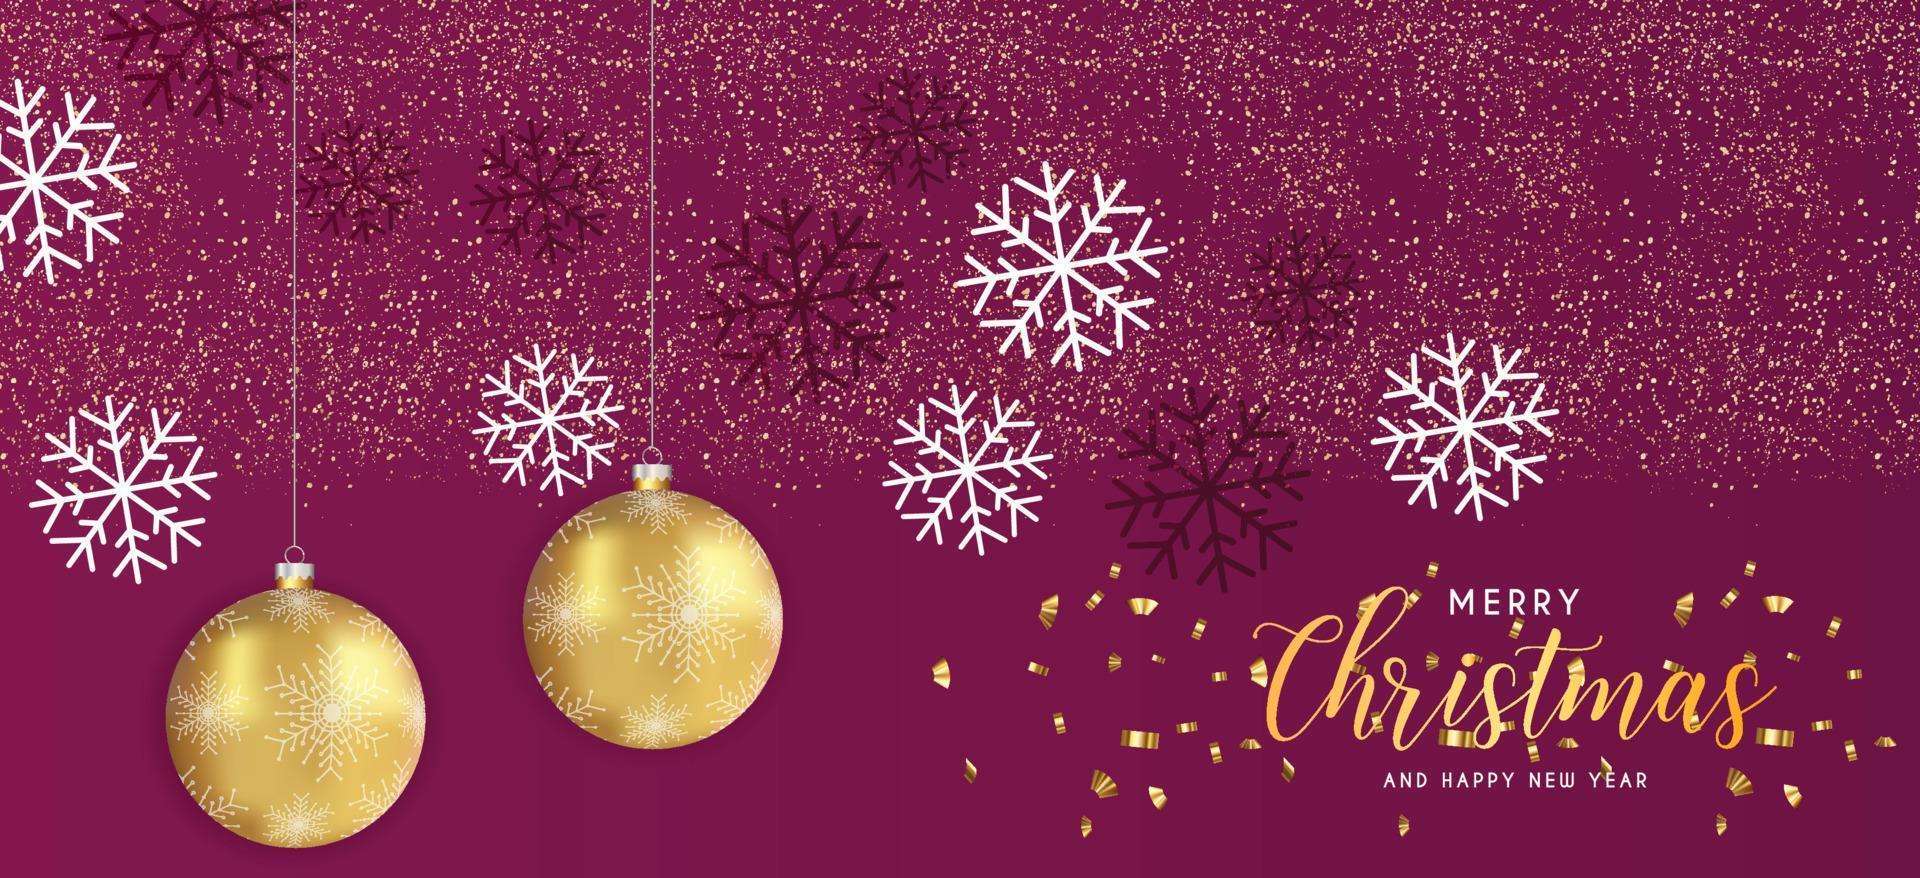 Festive Christmas Purple Background with blue ball Golden Christmas Decorations and Golden Glitters. Vector Illustration.